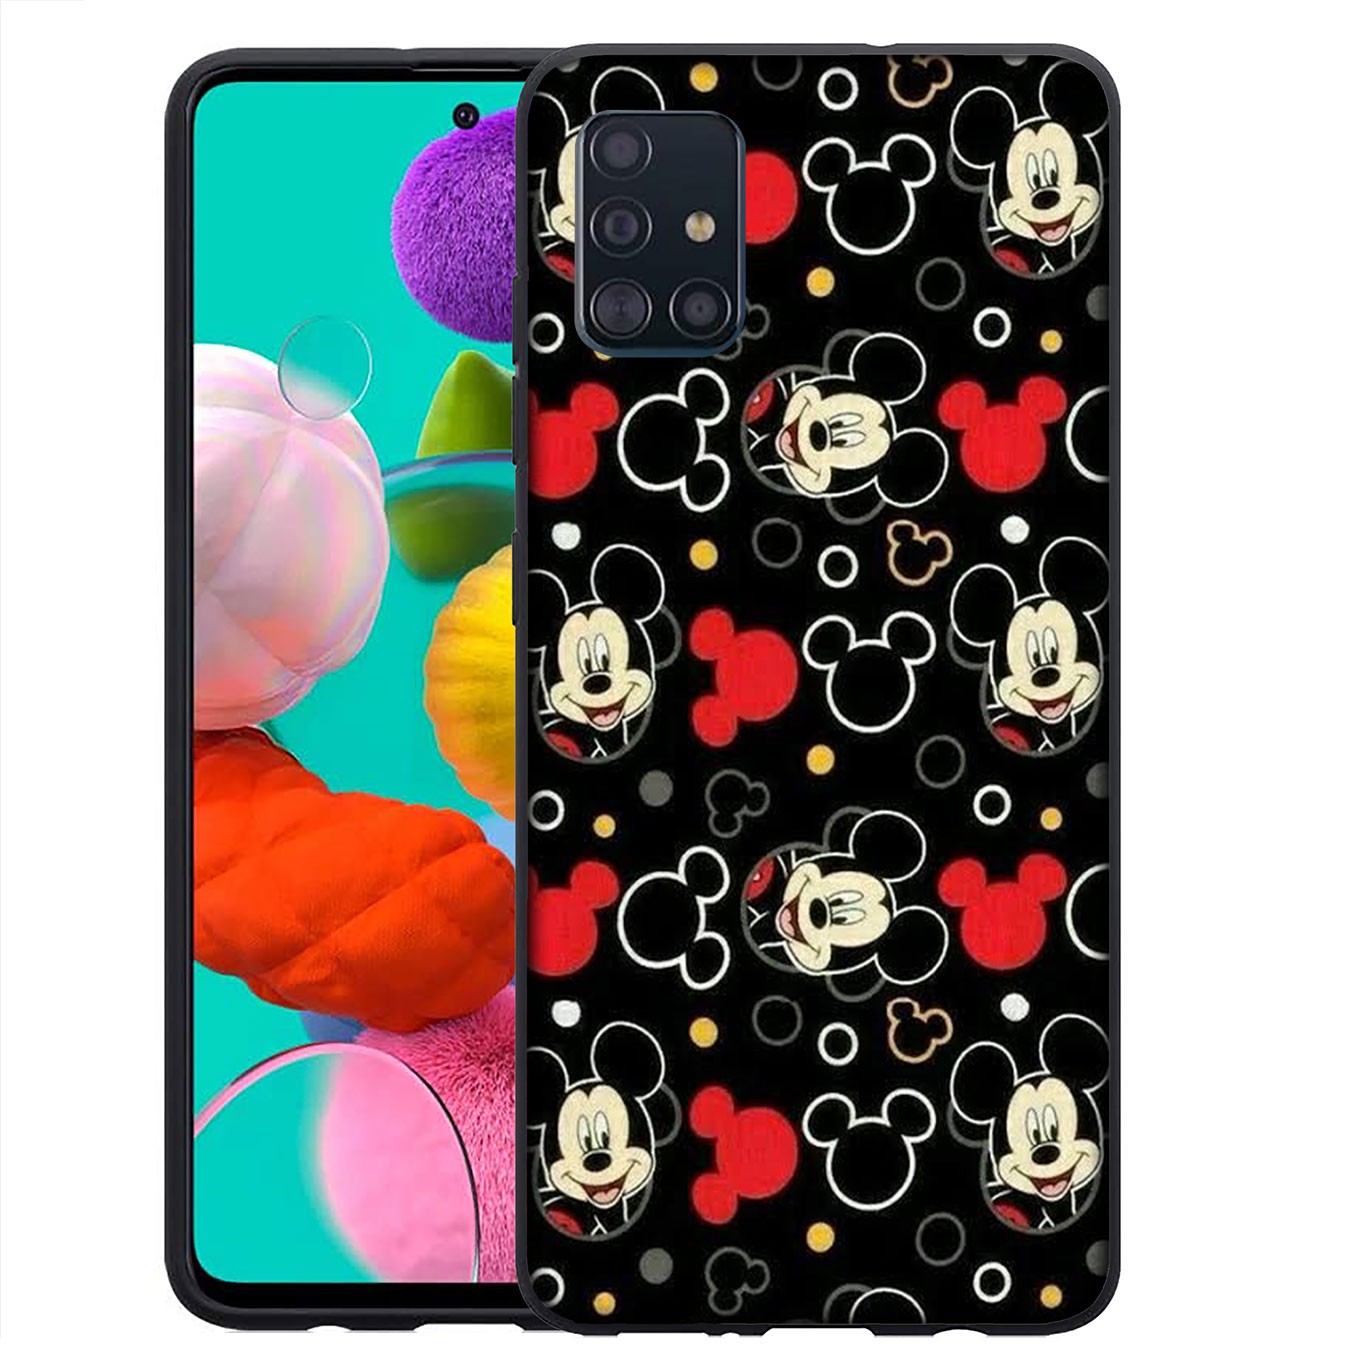 Samsung Galaxy A02S J2 J4 J5 J6 Plus J7 Prime A02 M02 j6+ A42 + Casing Soft Silicone cute Mickey Mouse Cartoon Phone Case